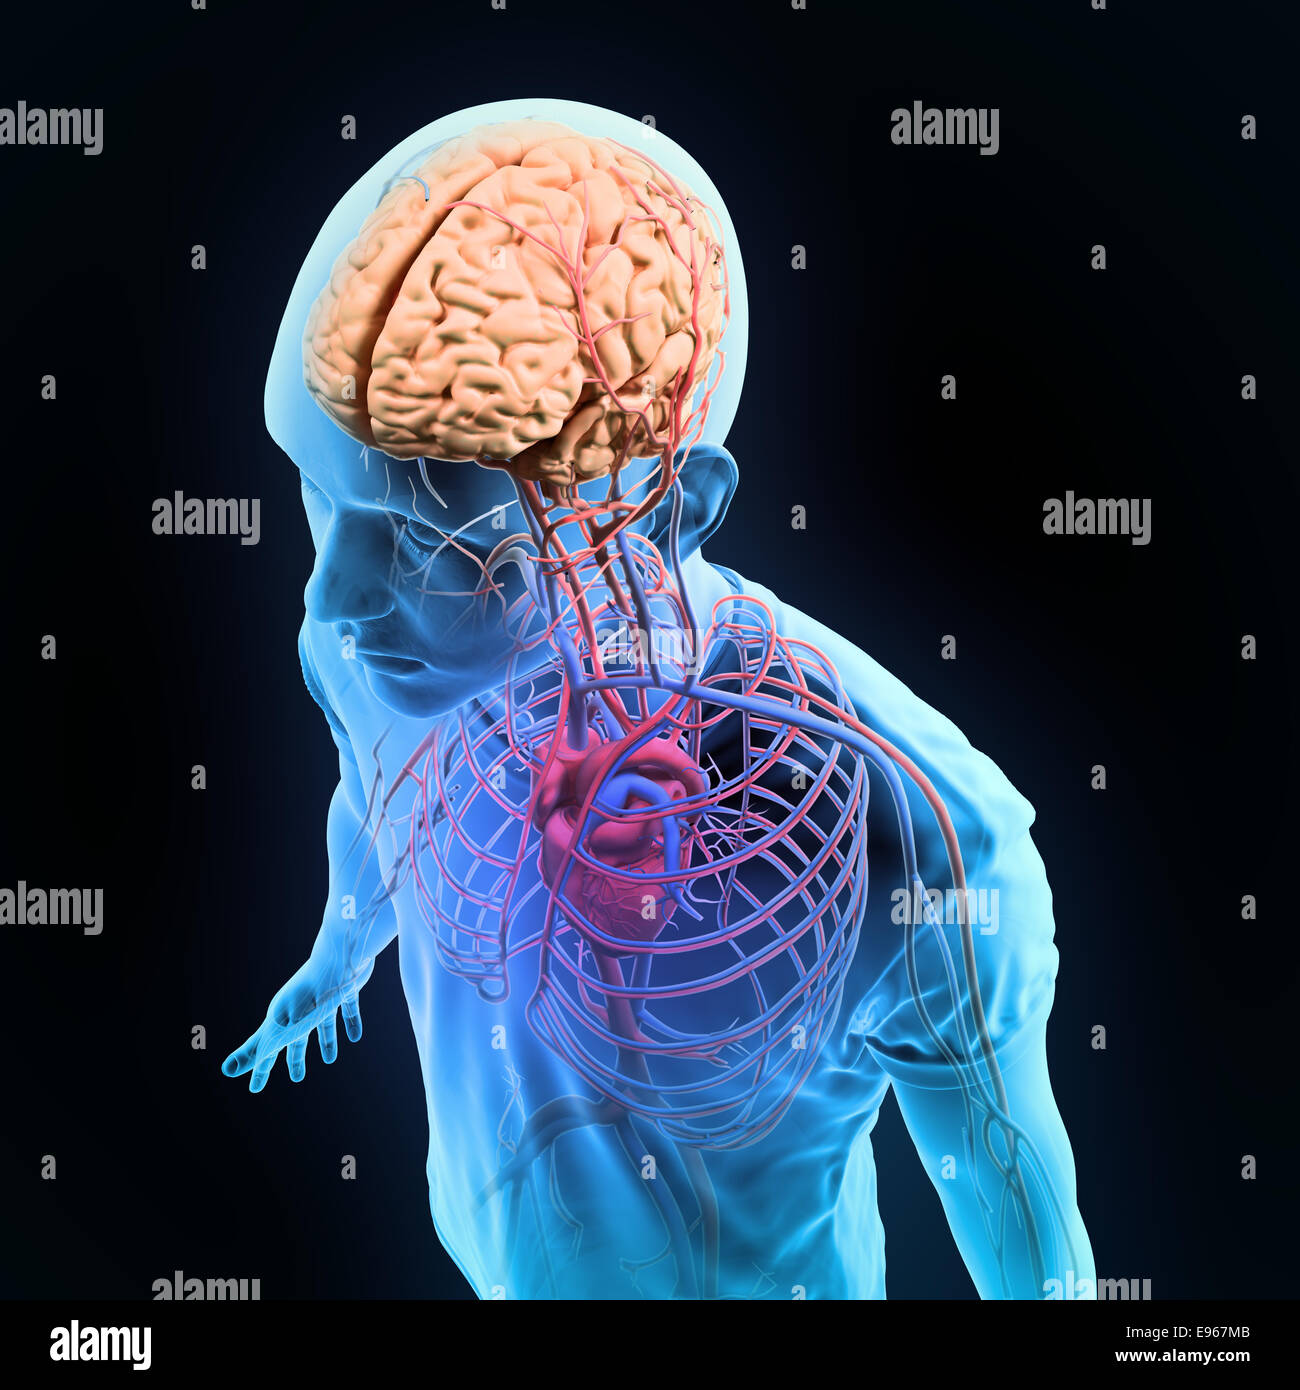 Human anatomy illustration - central nervous and circulatory systems Stock Photo